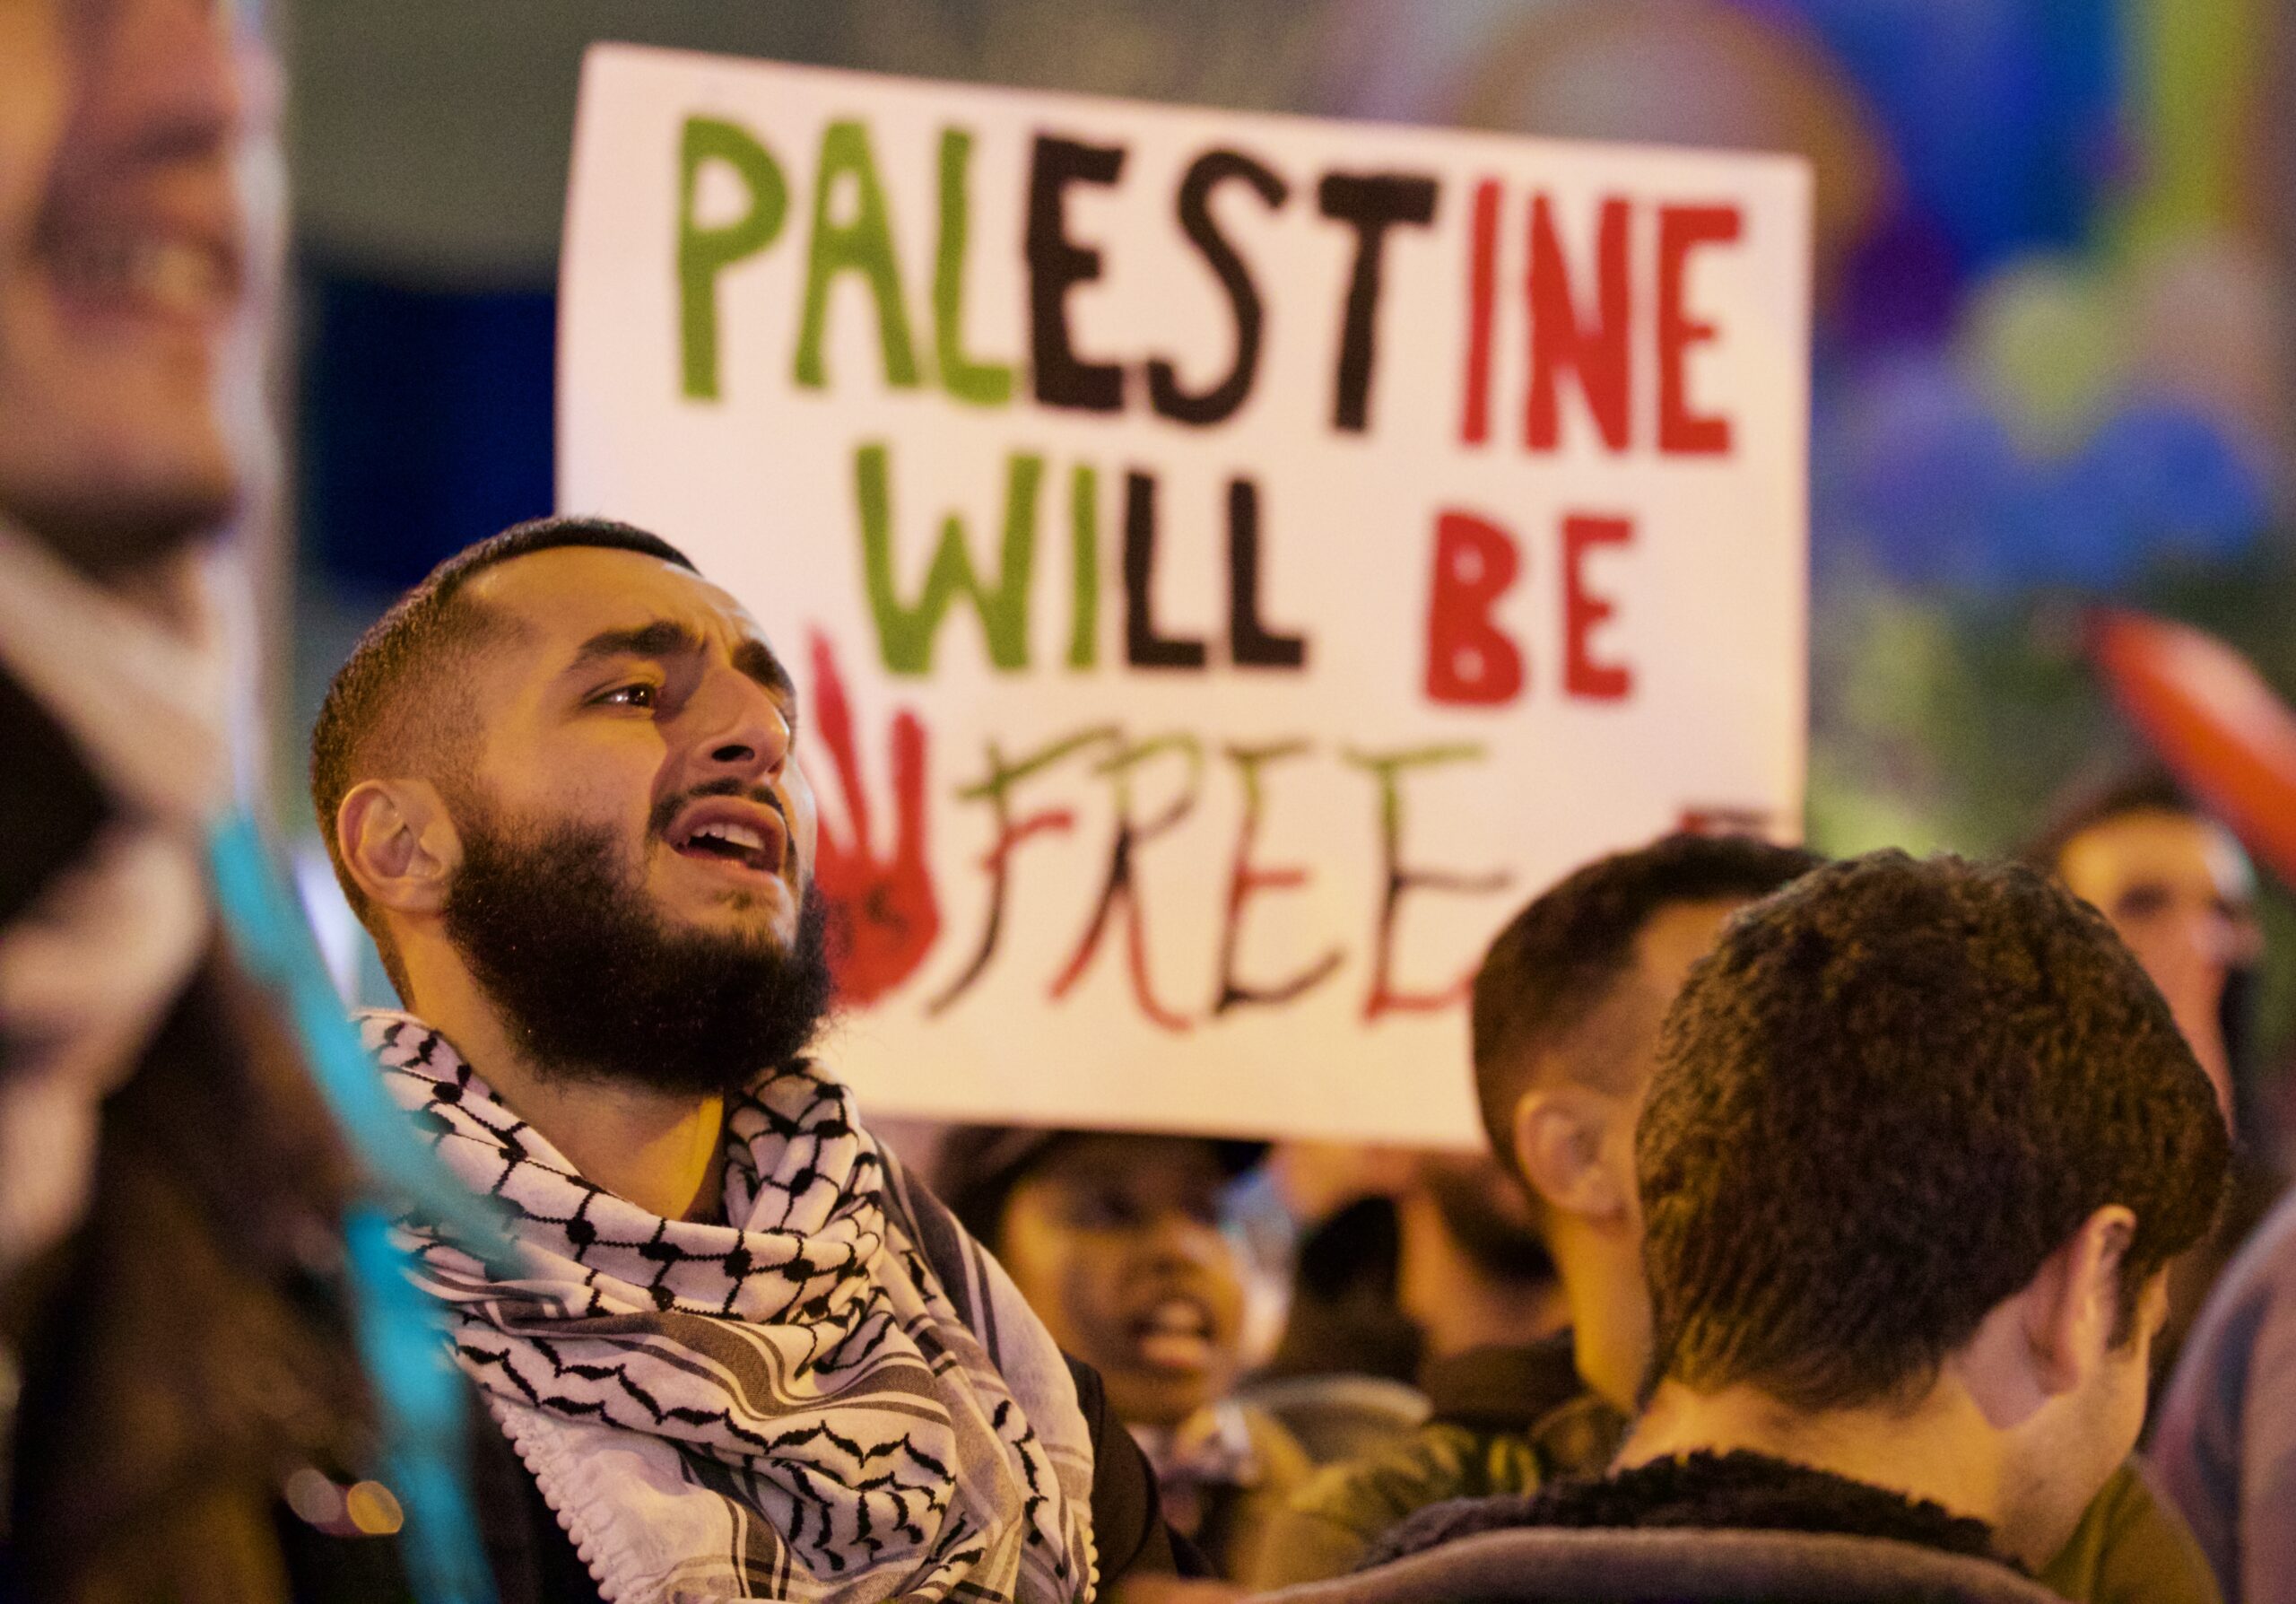 Protesters in Toronto on Tuesday, Oct. 17, near the Israeli Consulate. (Photo by: Nur Dogan / New Canadian Media)